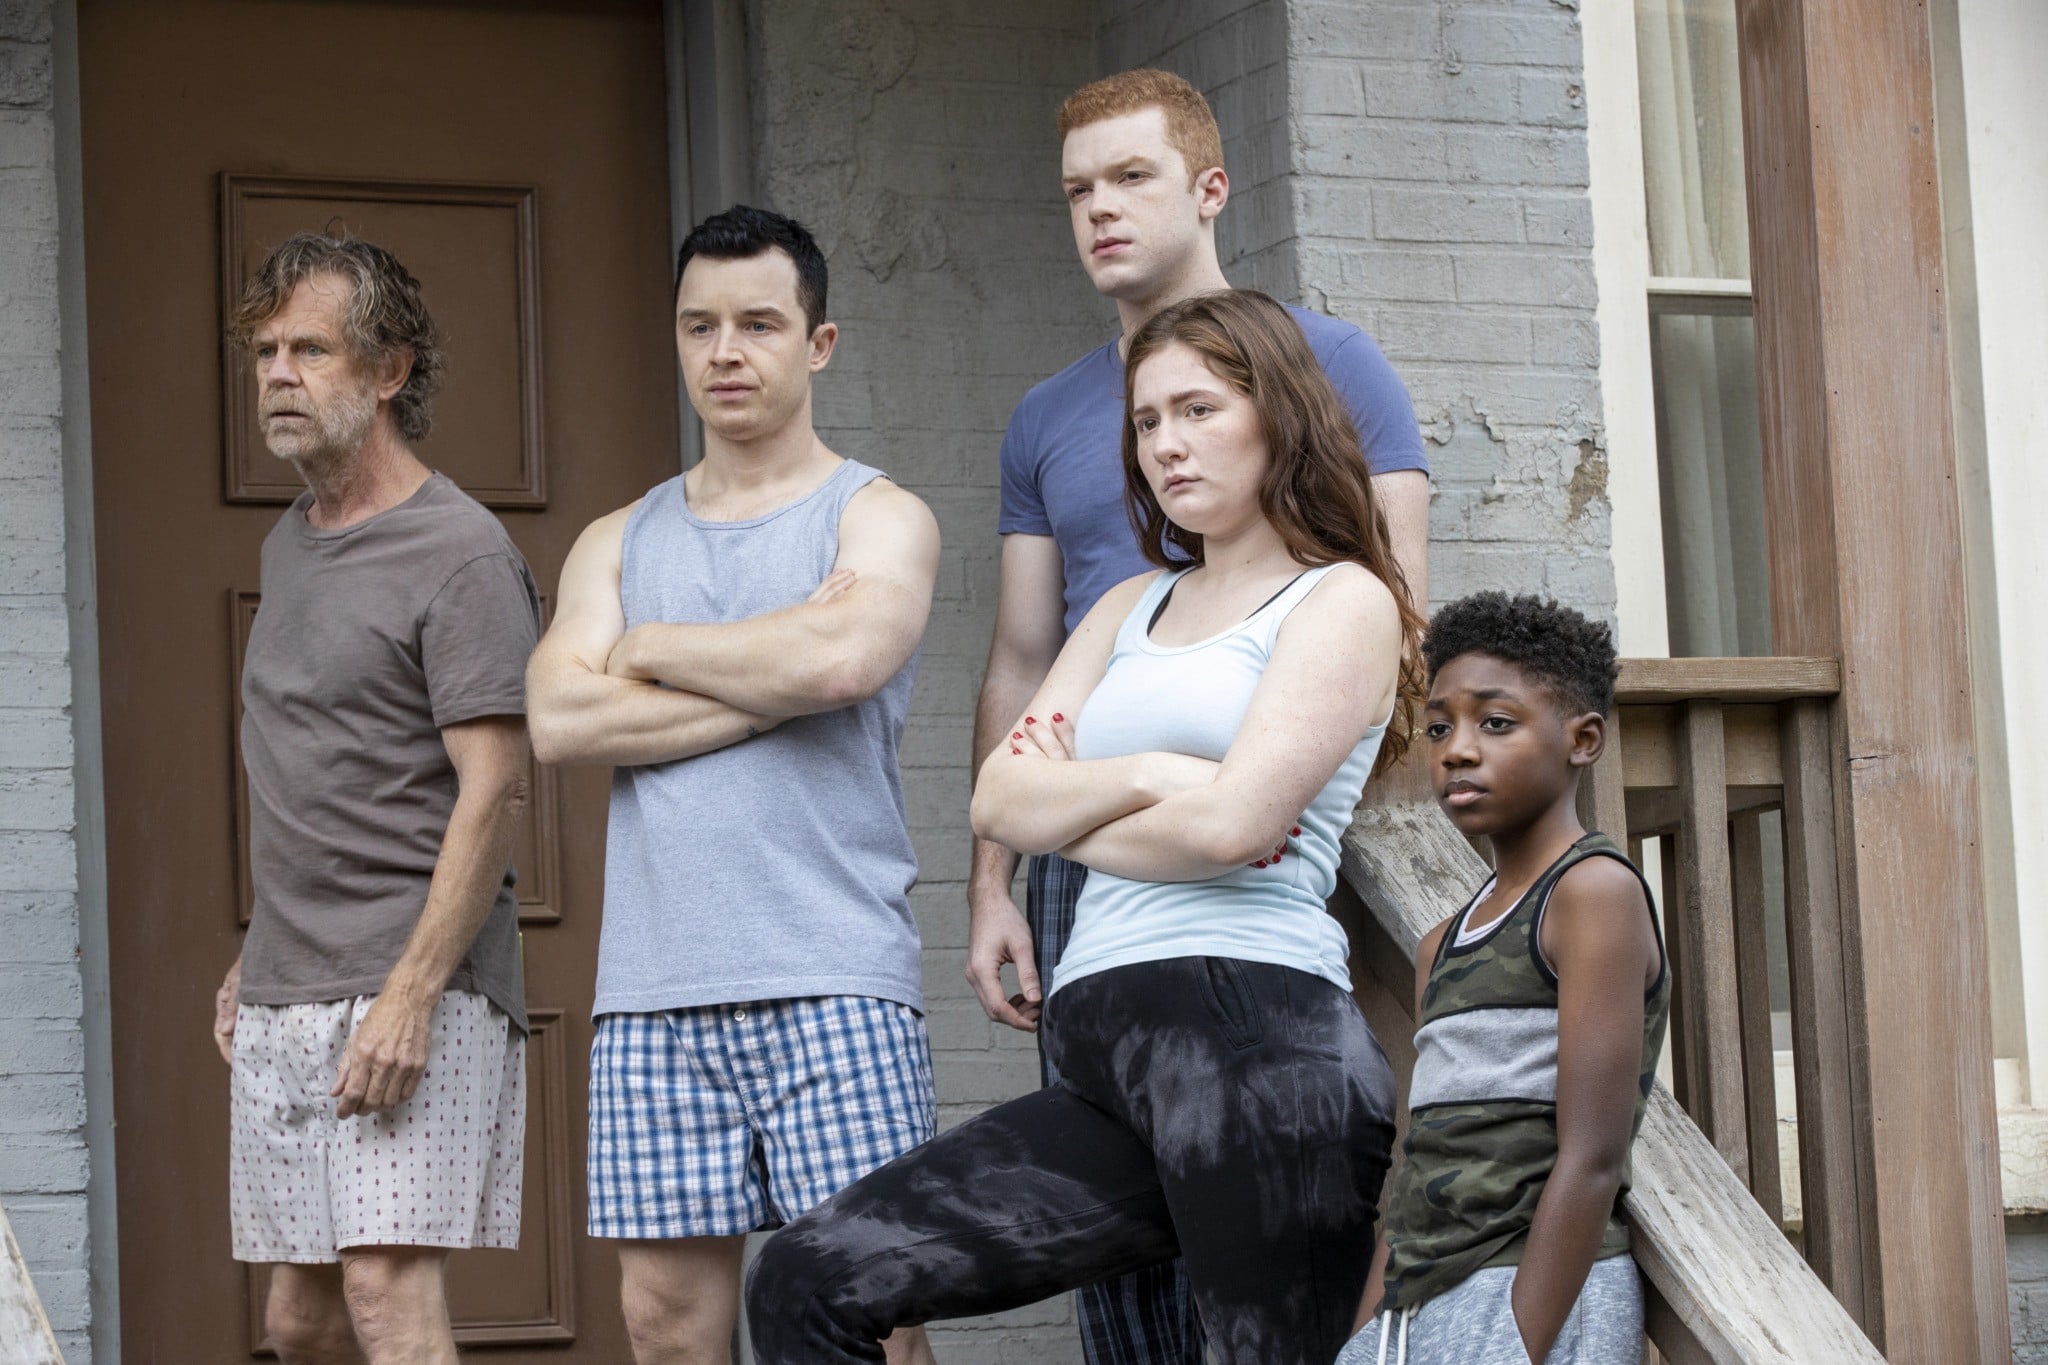 SHAMELESS, from left: Willliam H. Macy, Noel Fisher, Cameron Monaghan, Emma Kenney, Christian Isaiah, Nimby', (Season 11, ep. 1104, aired Jan. 10, 2021). photo: Paul Sarkis / Showtime / Courtesy Everett Collection